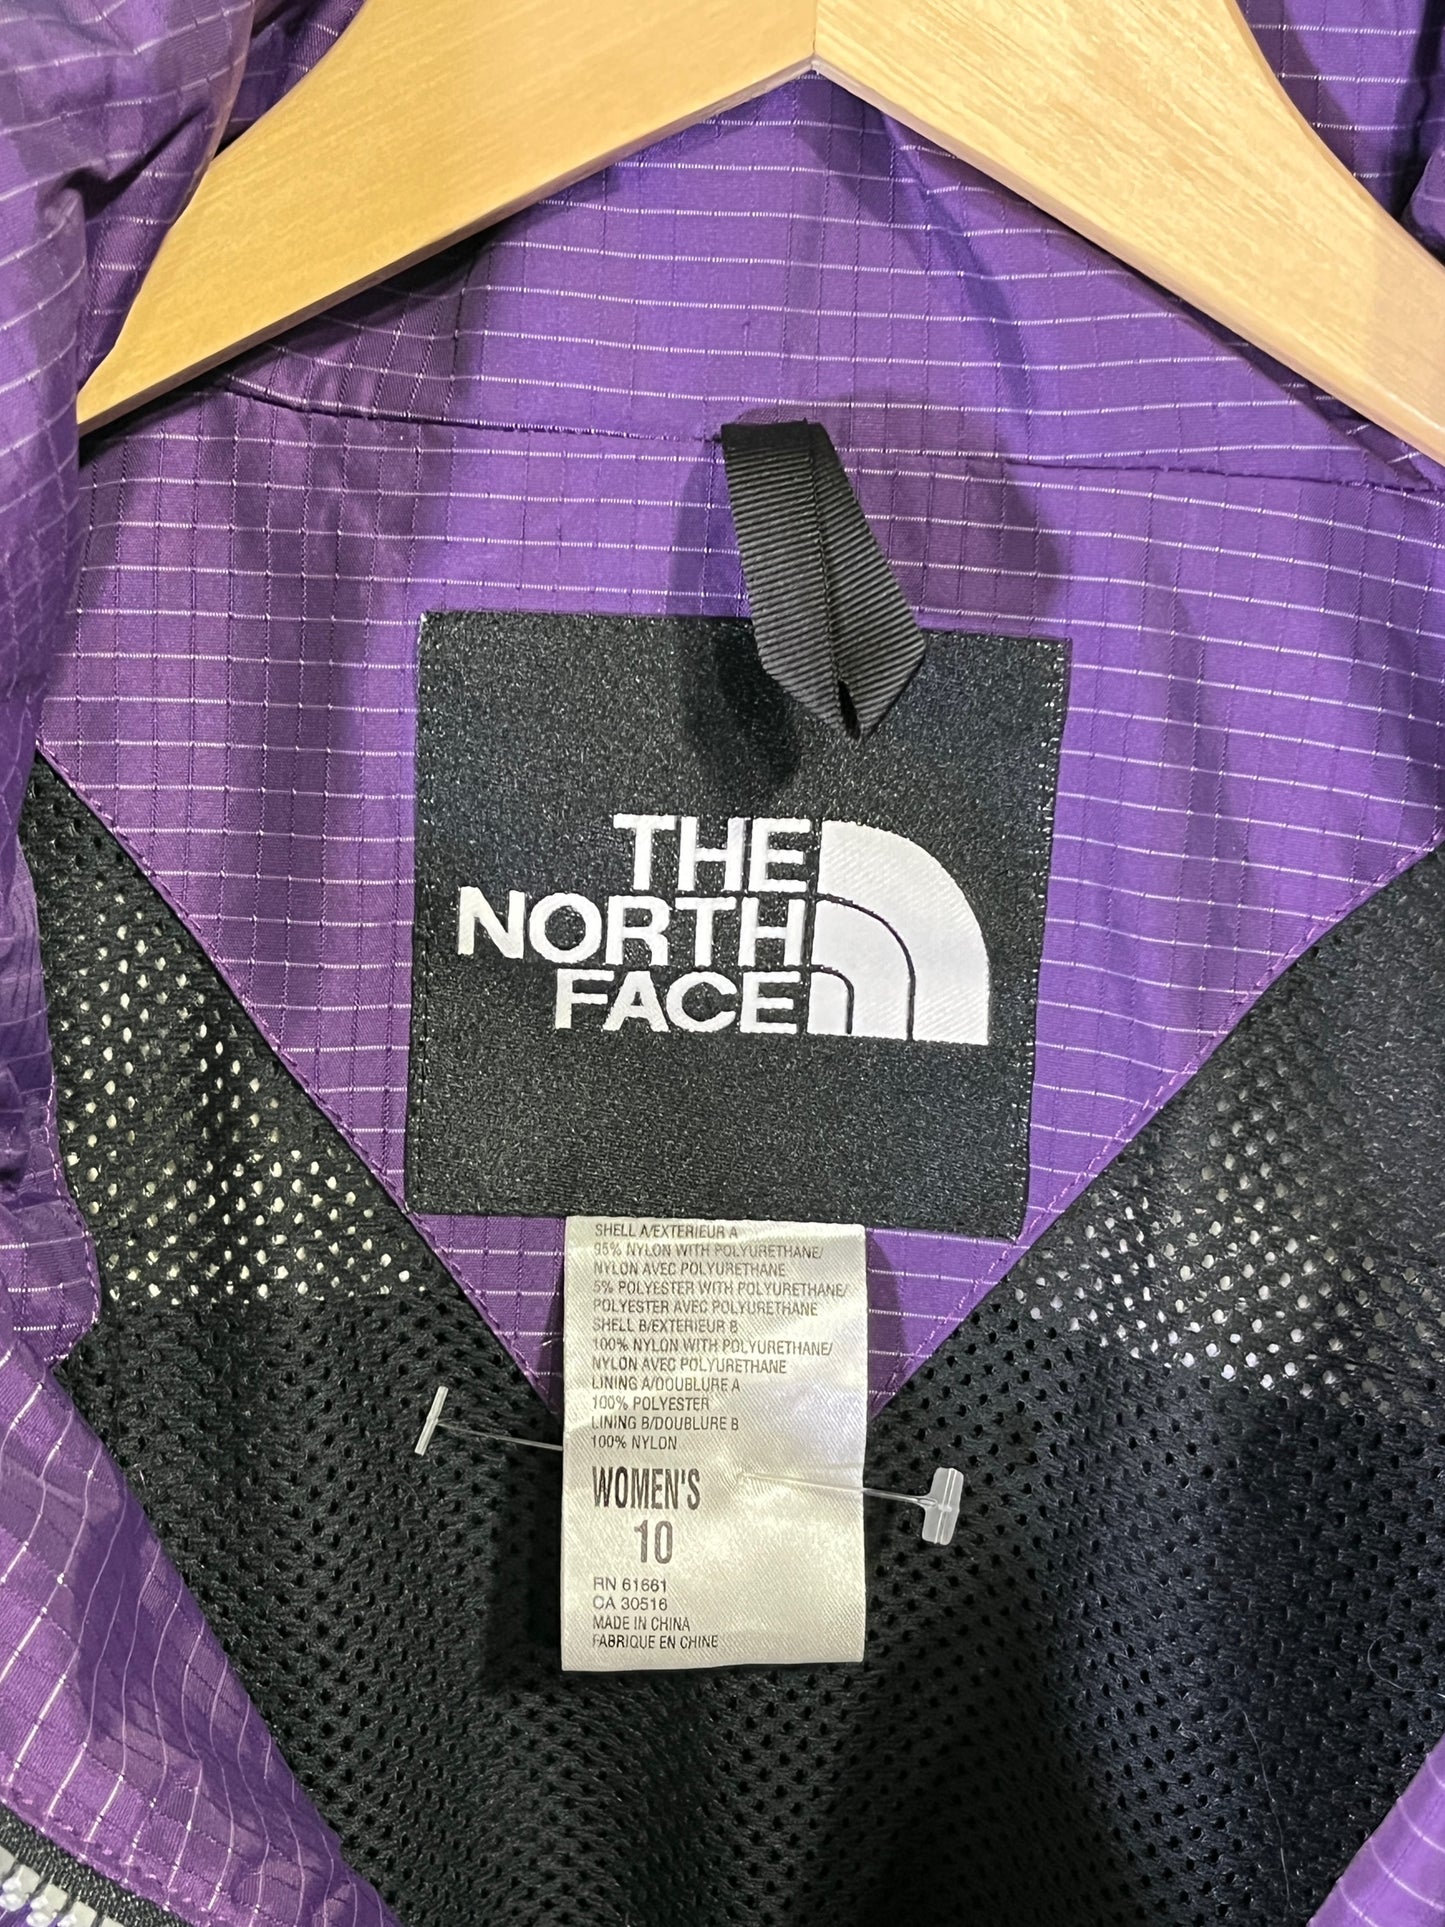 Vintage 90's The North Face Steeptech Extreme Gear Purple Coat Size Small (10)